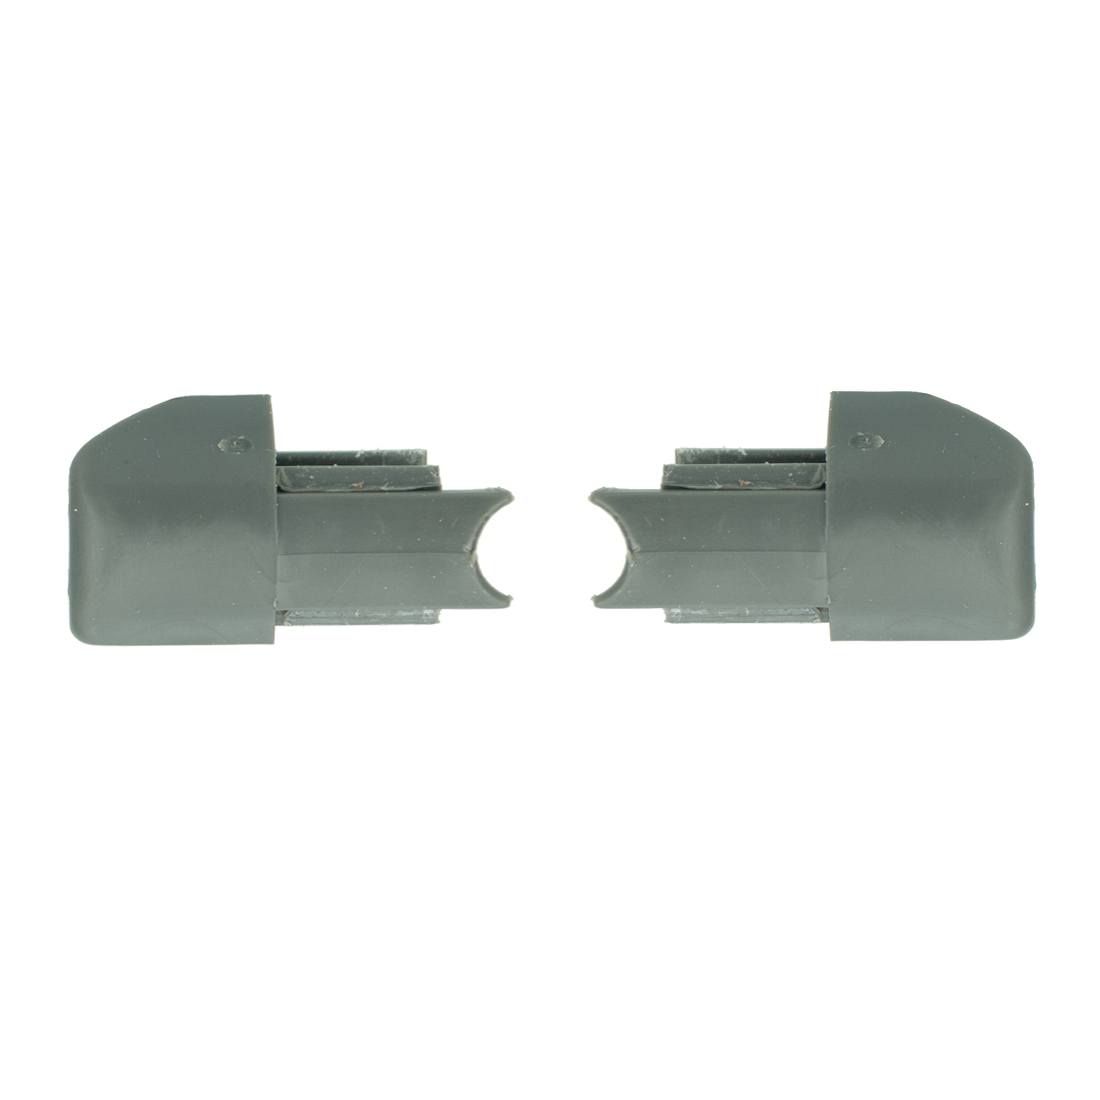 Sörbo Replacement End Plugs - Side by Side View